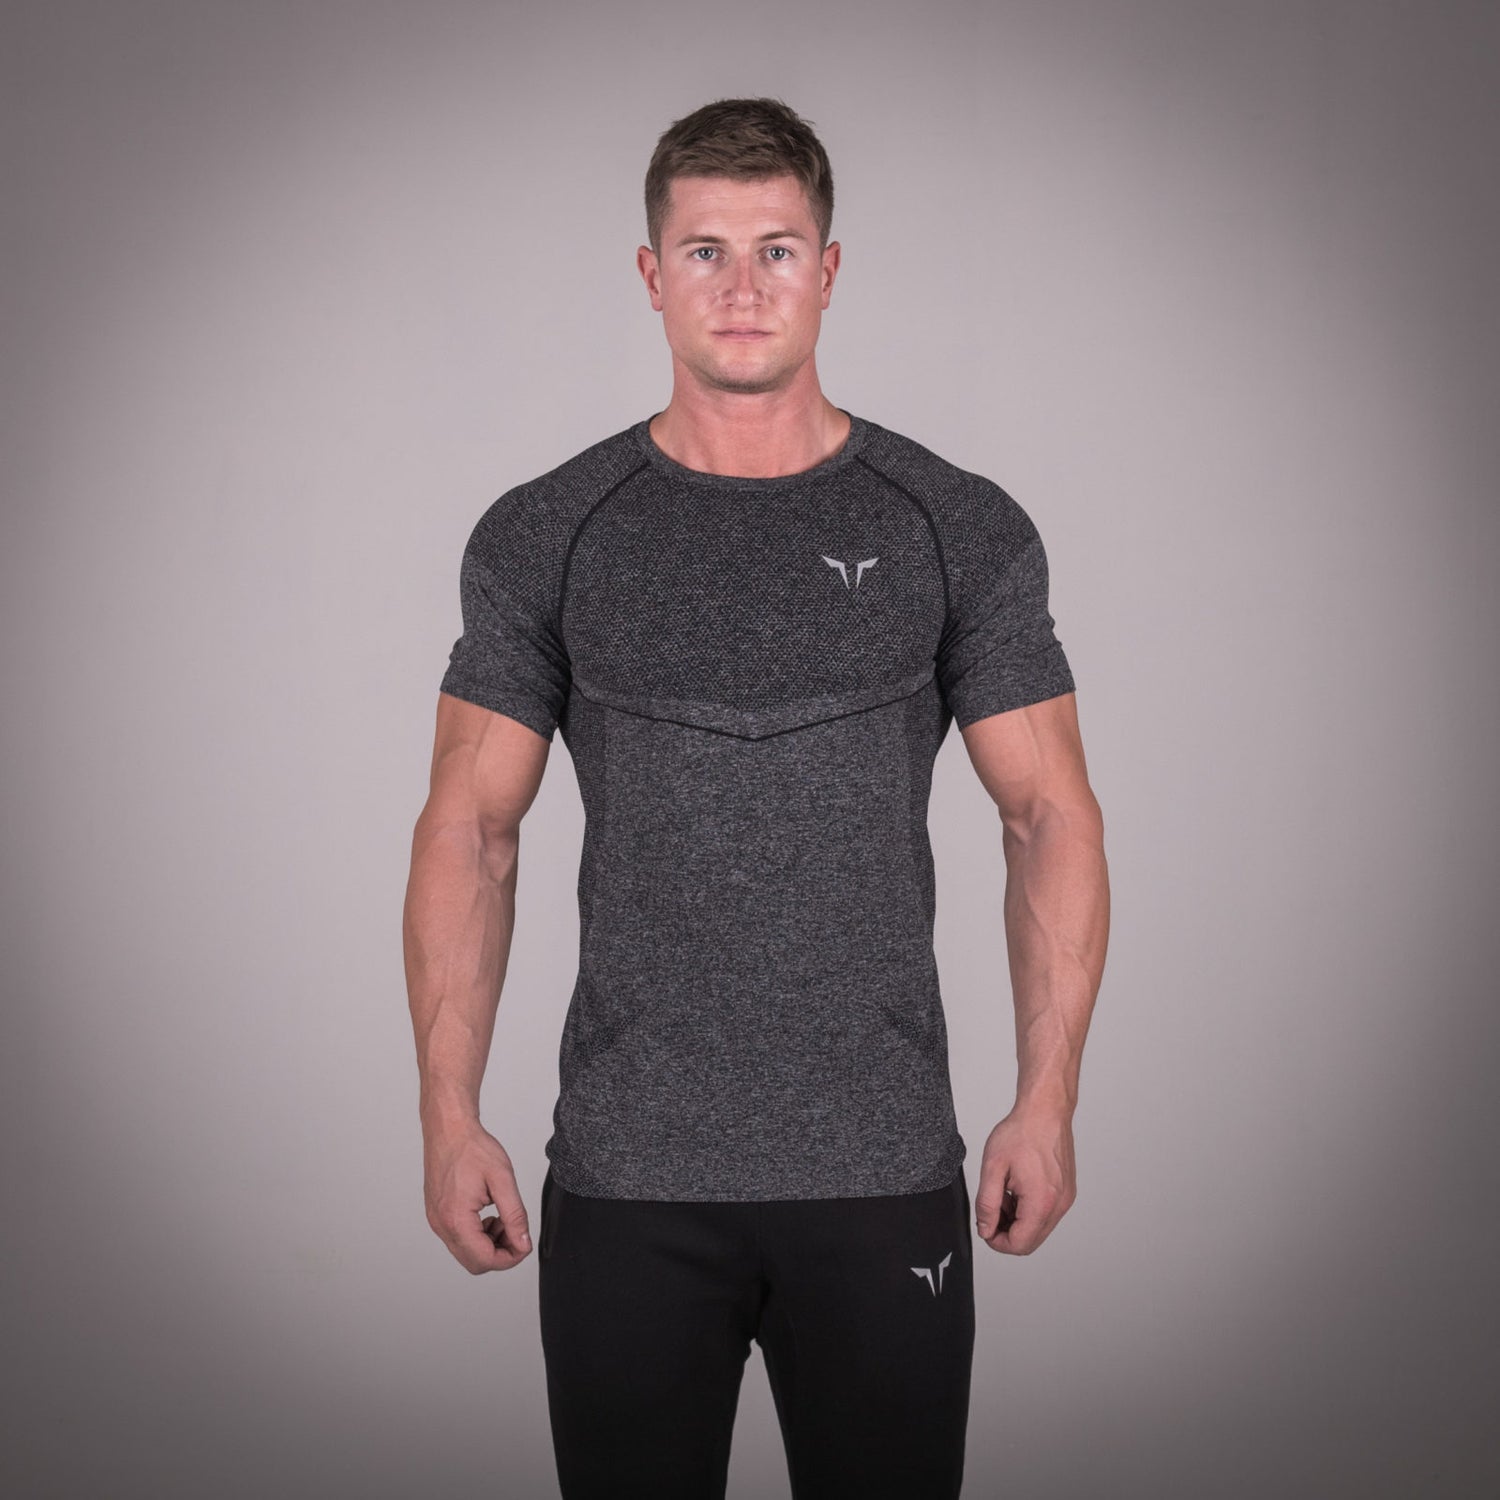 squatwolf-gym-wear-seamless-dry-knit-tee-grey-workout-t-shirts-for-men